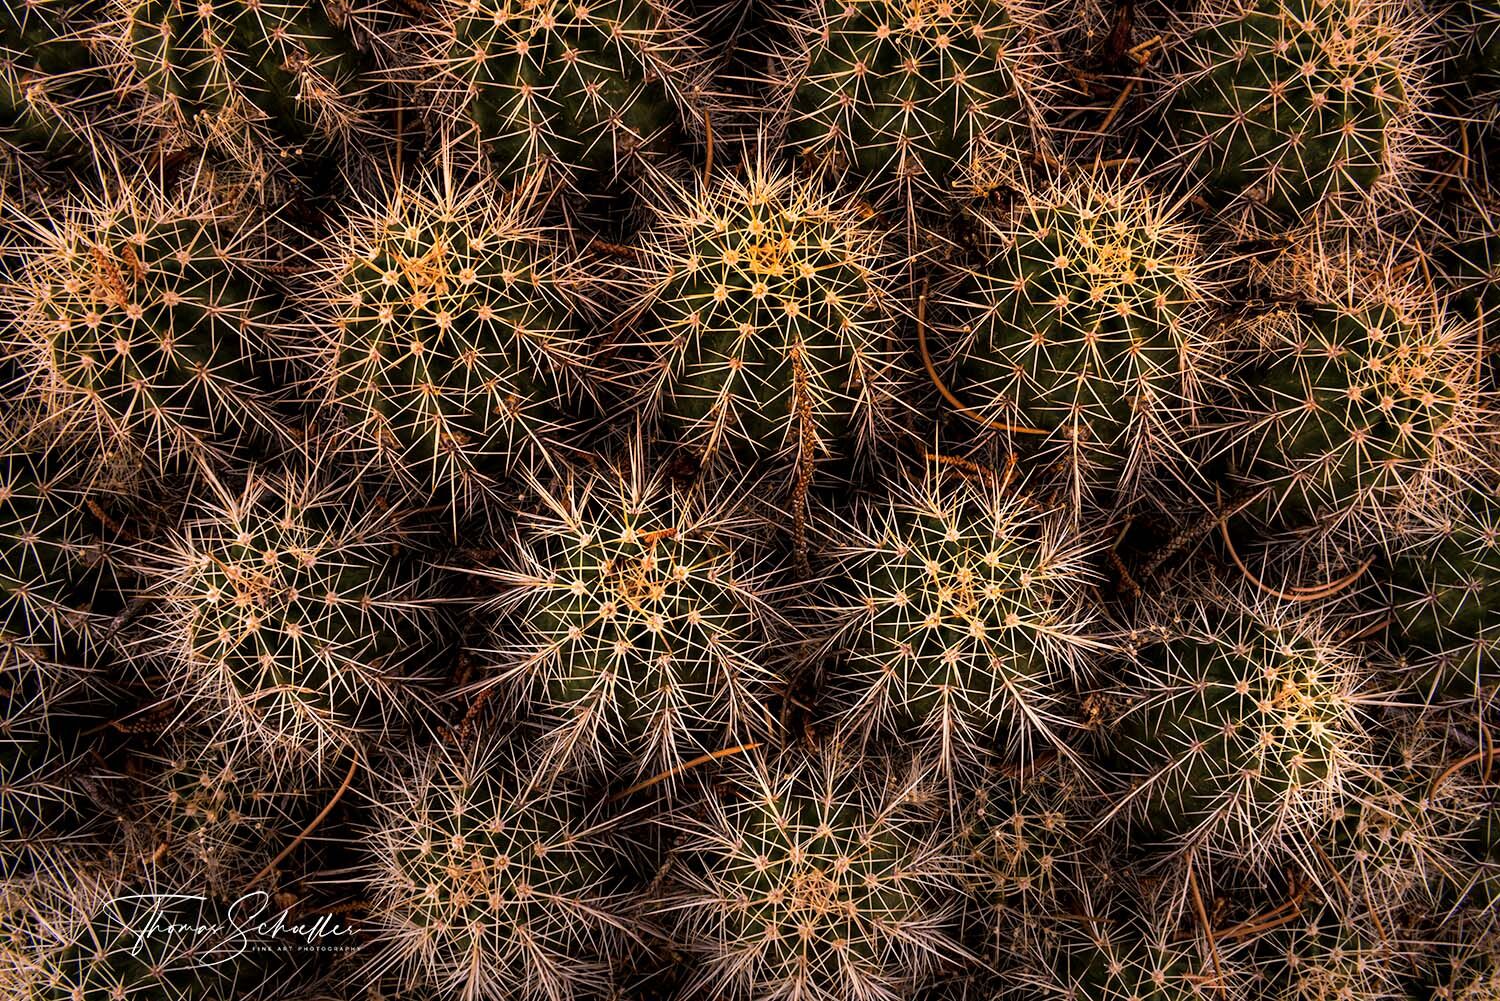 A mesmerizing semi-abstract nature photograph overlooking a cluster of prickly Barrel Cactus on a Utah Mesa | Limited Edition Fine Art Nature prints  